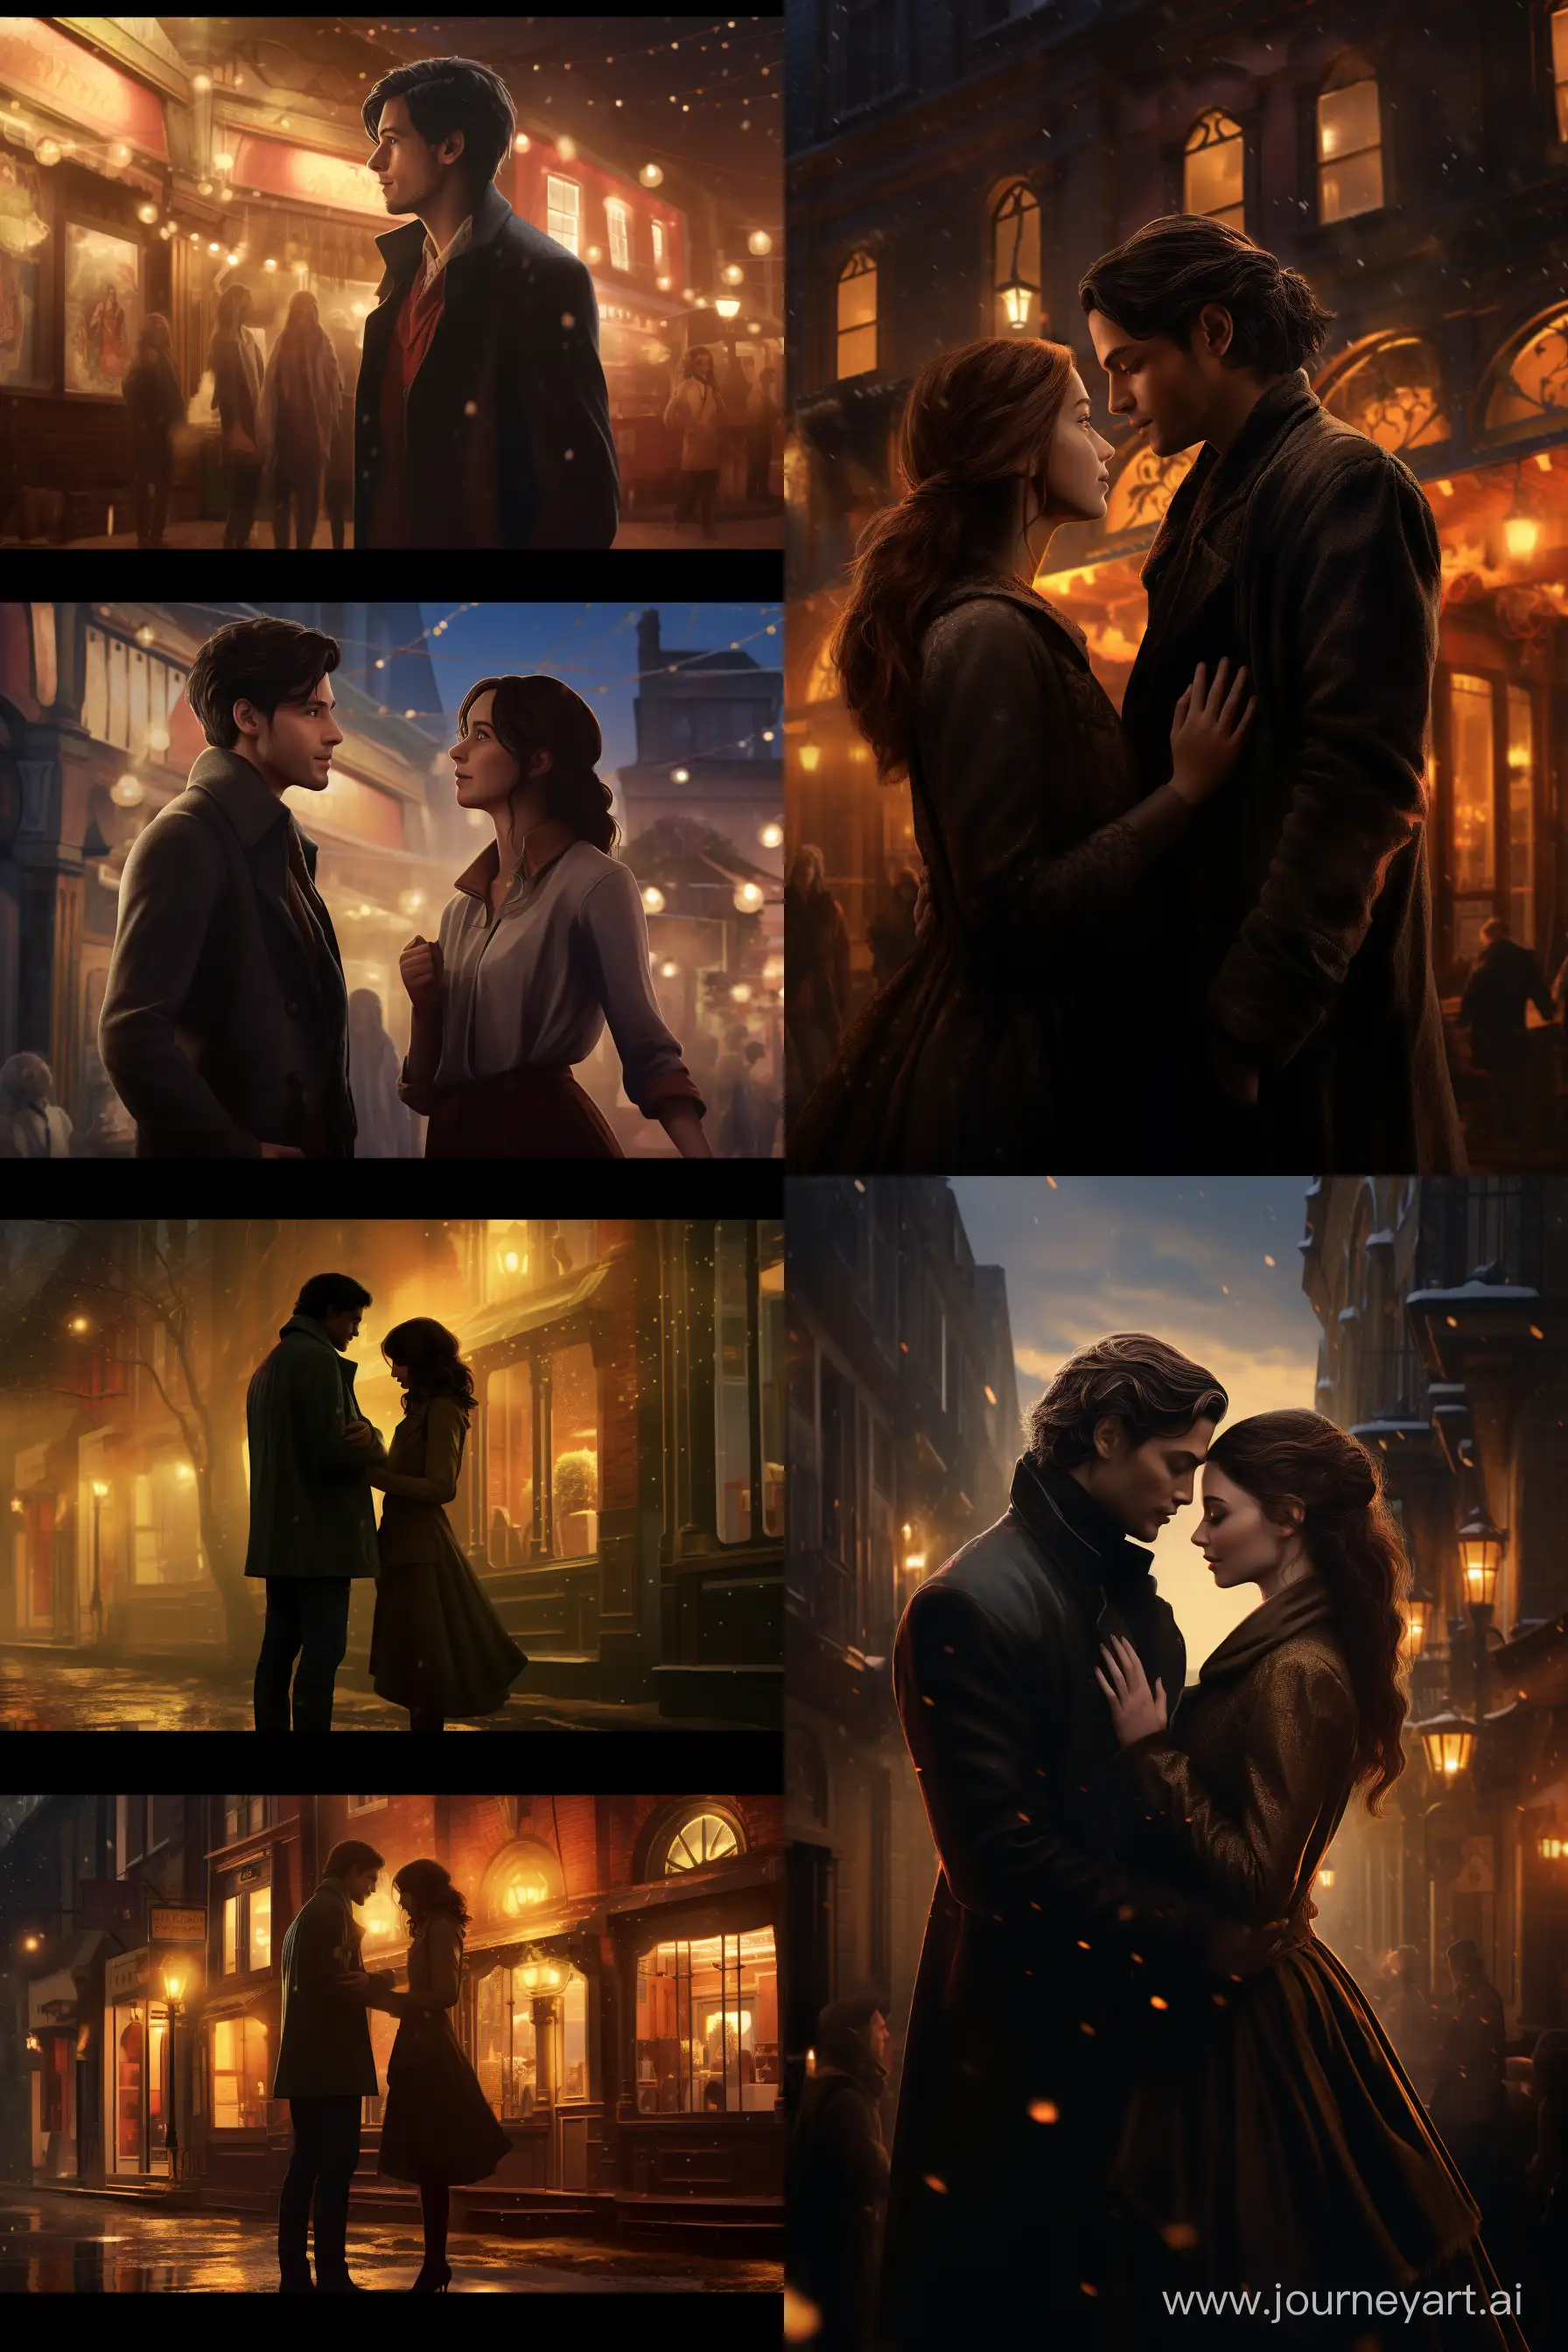 Enchanting-Christmas-Night-in-a-Magical-Town-Romantic-Concept-Art